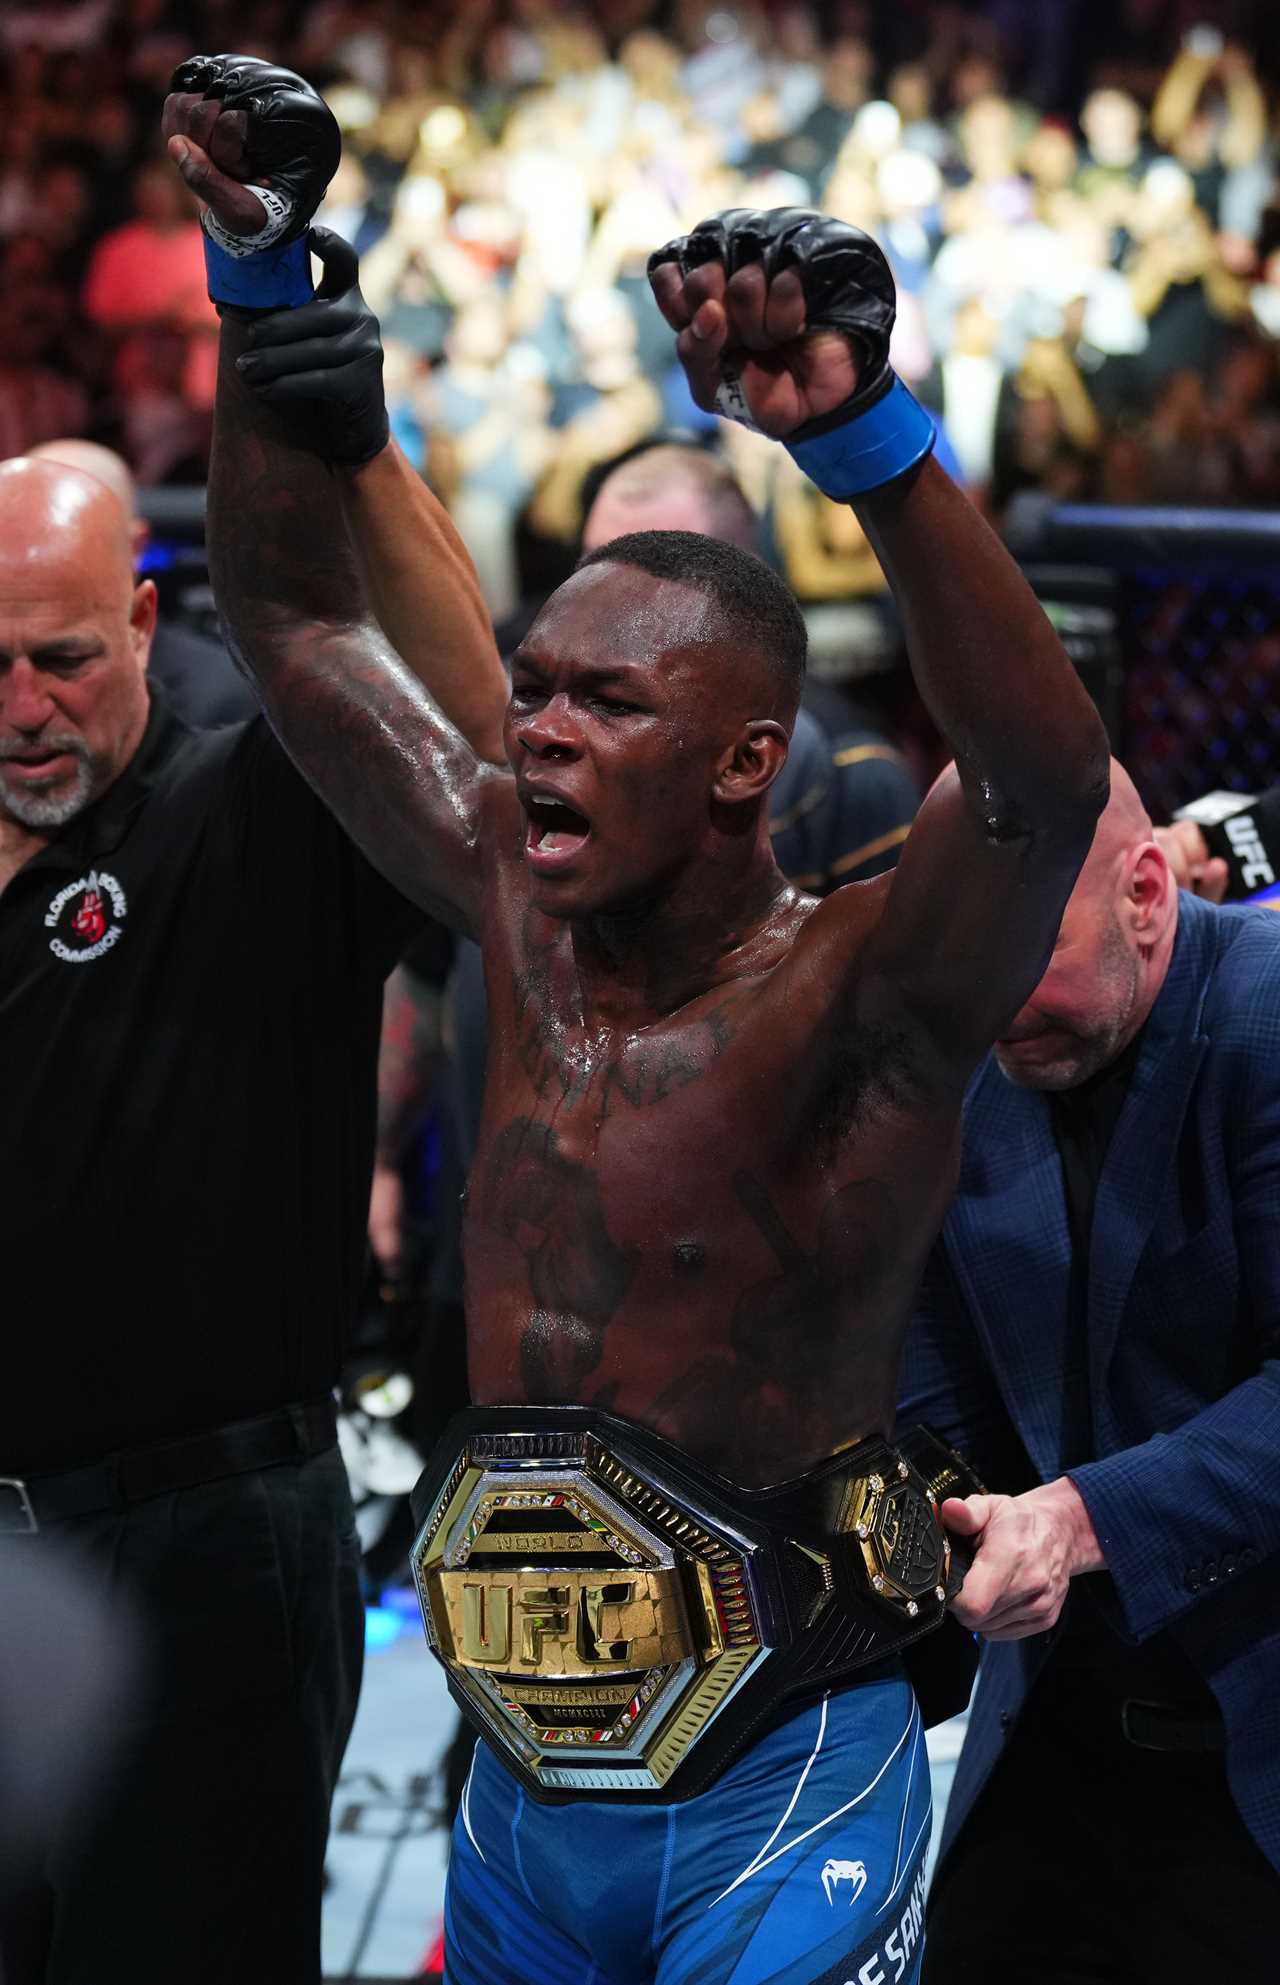 Watch 'petty Israel Adesanya' brutally TROLL Pereira just seconds after UFC 287 KO. He mocks his rival's bow-and-arrow entrance